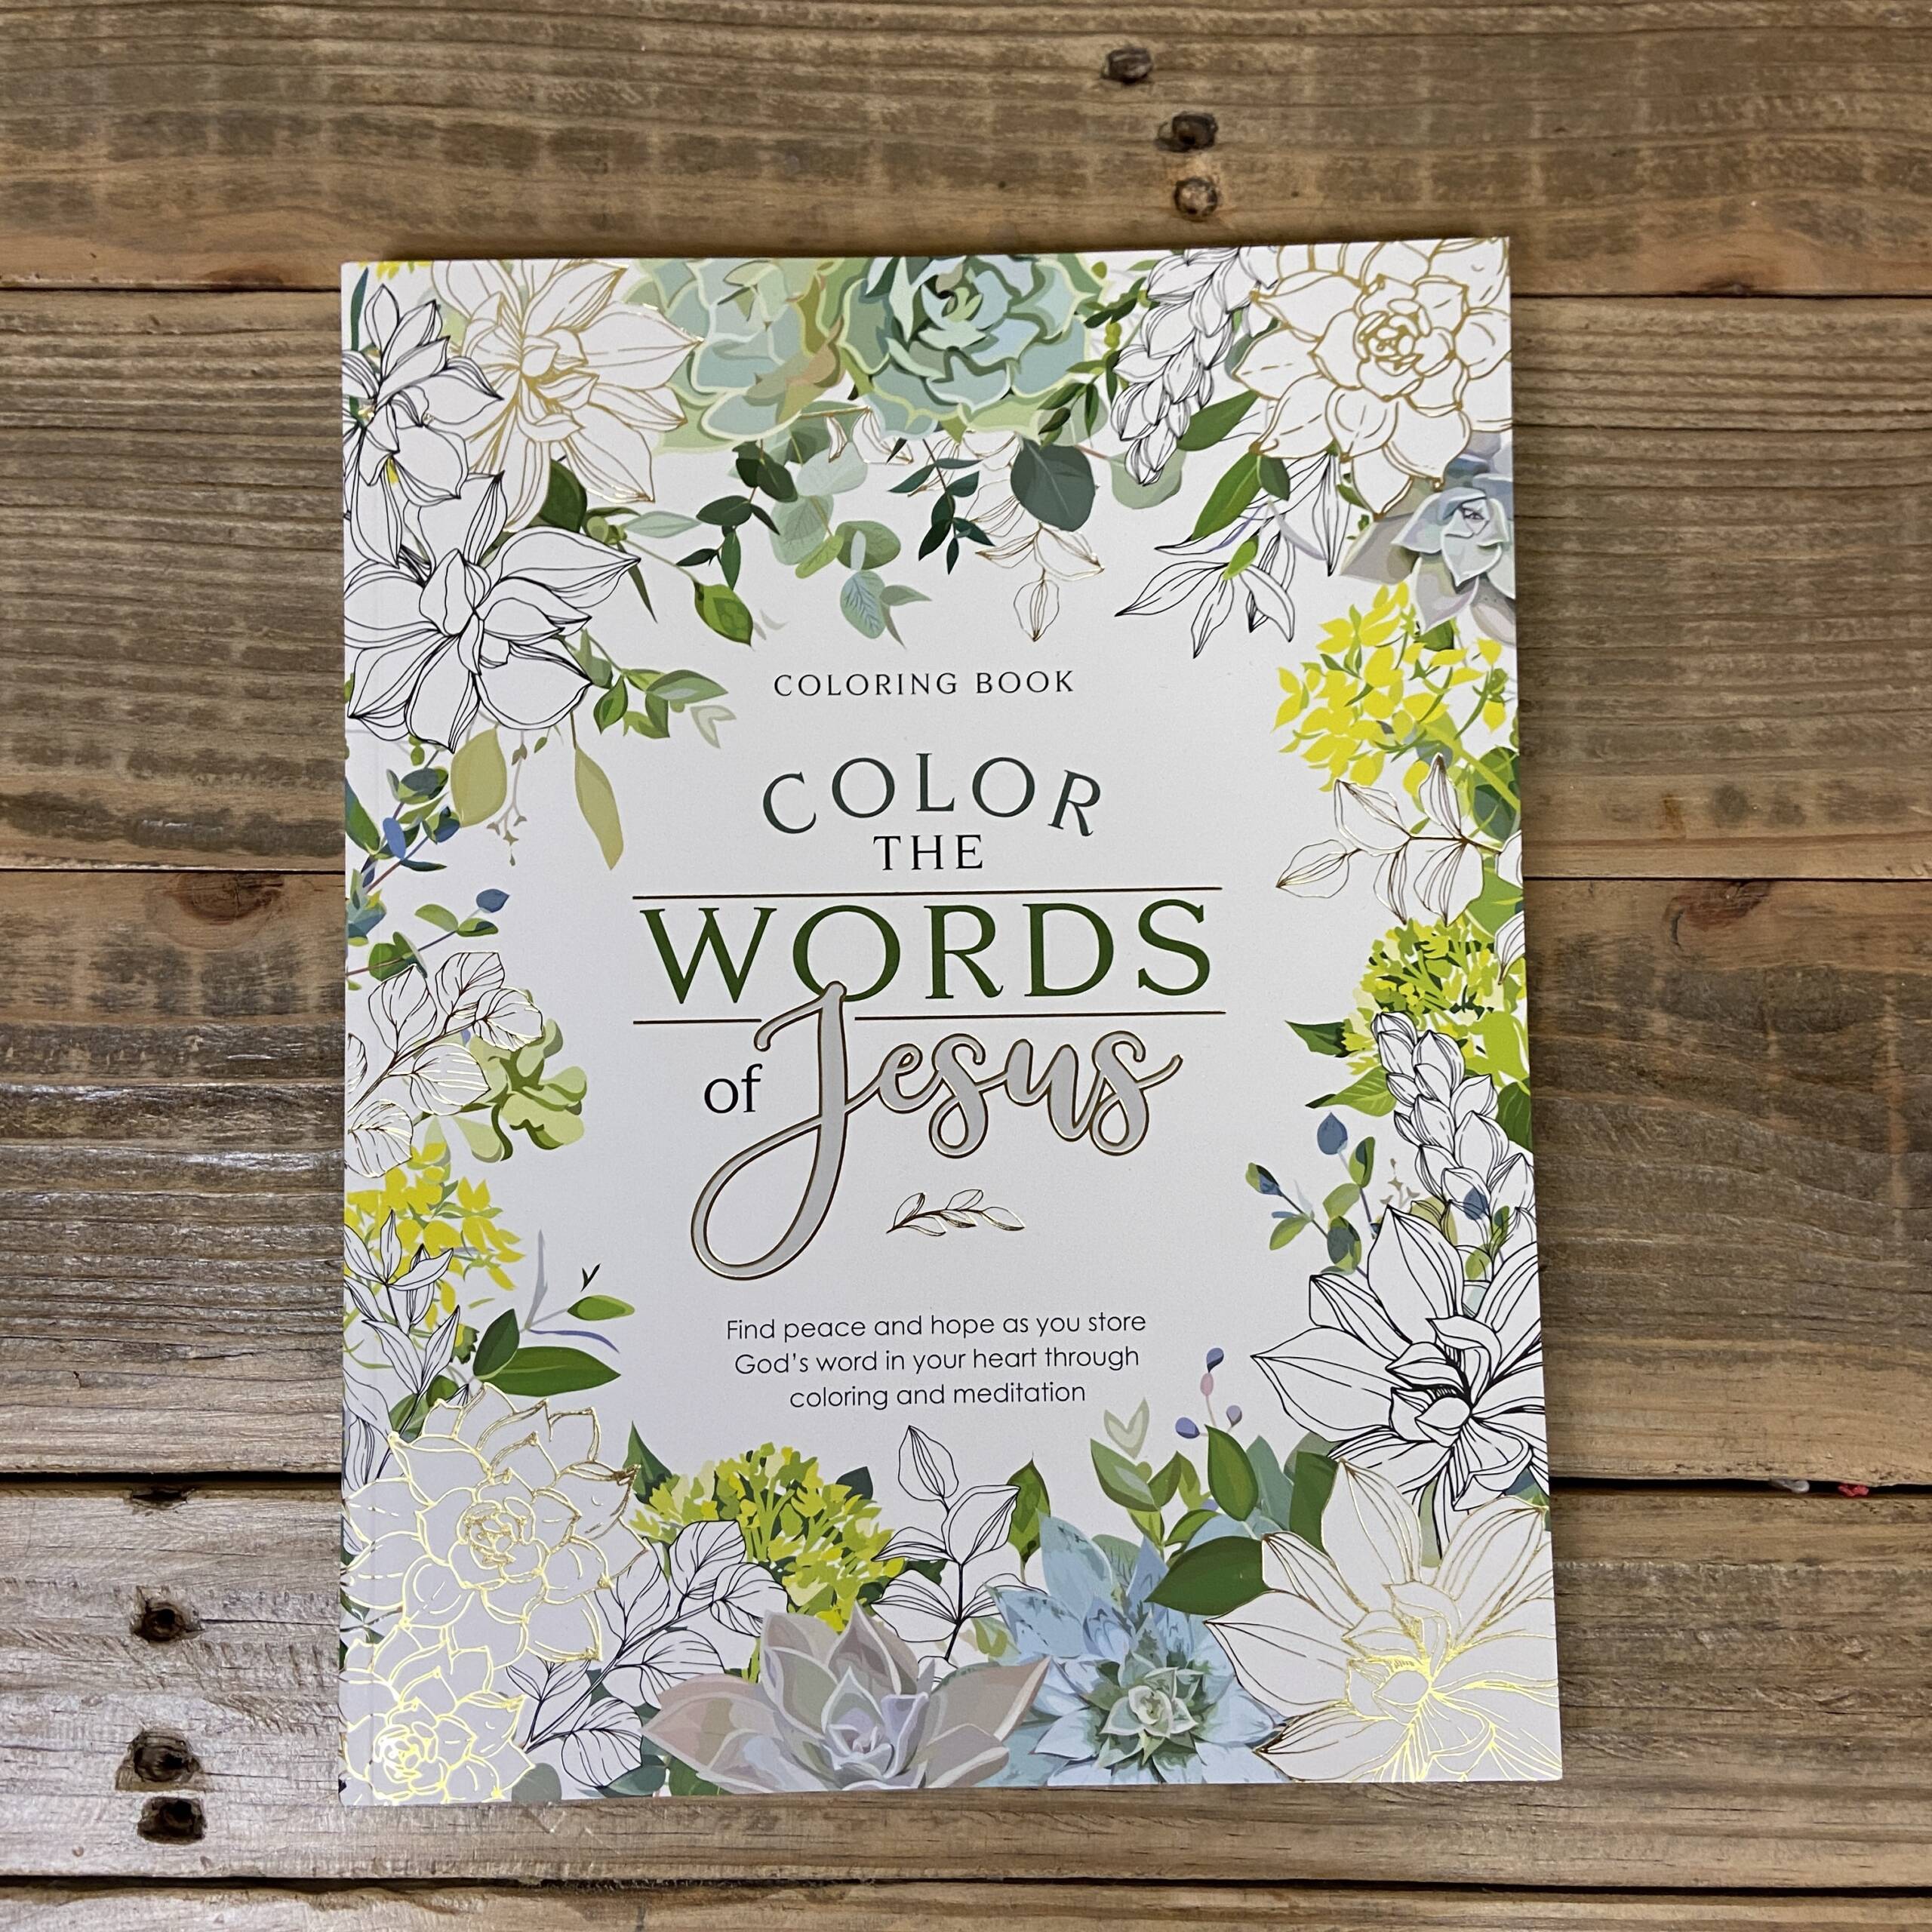 Adult Coloring: How Coloring Books Can Bring You Peace